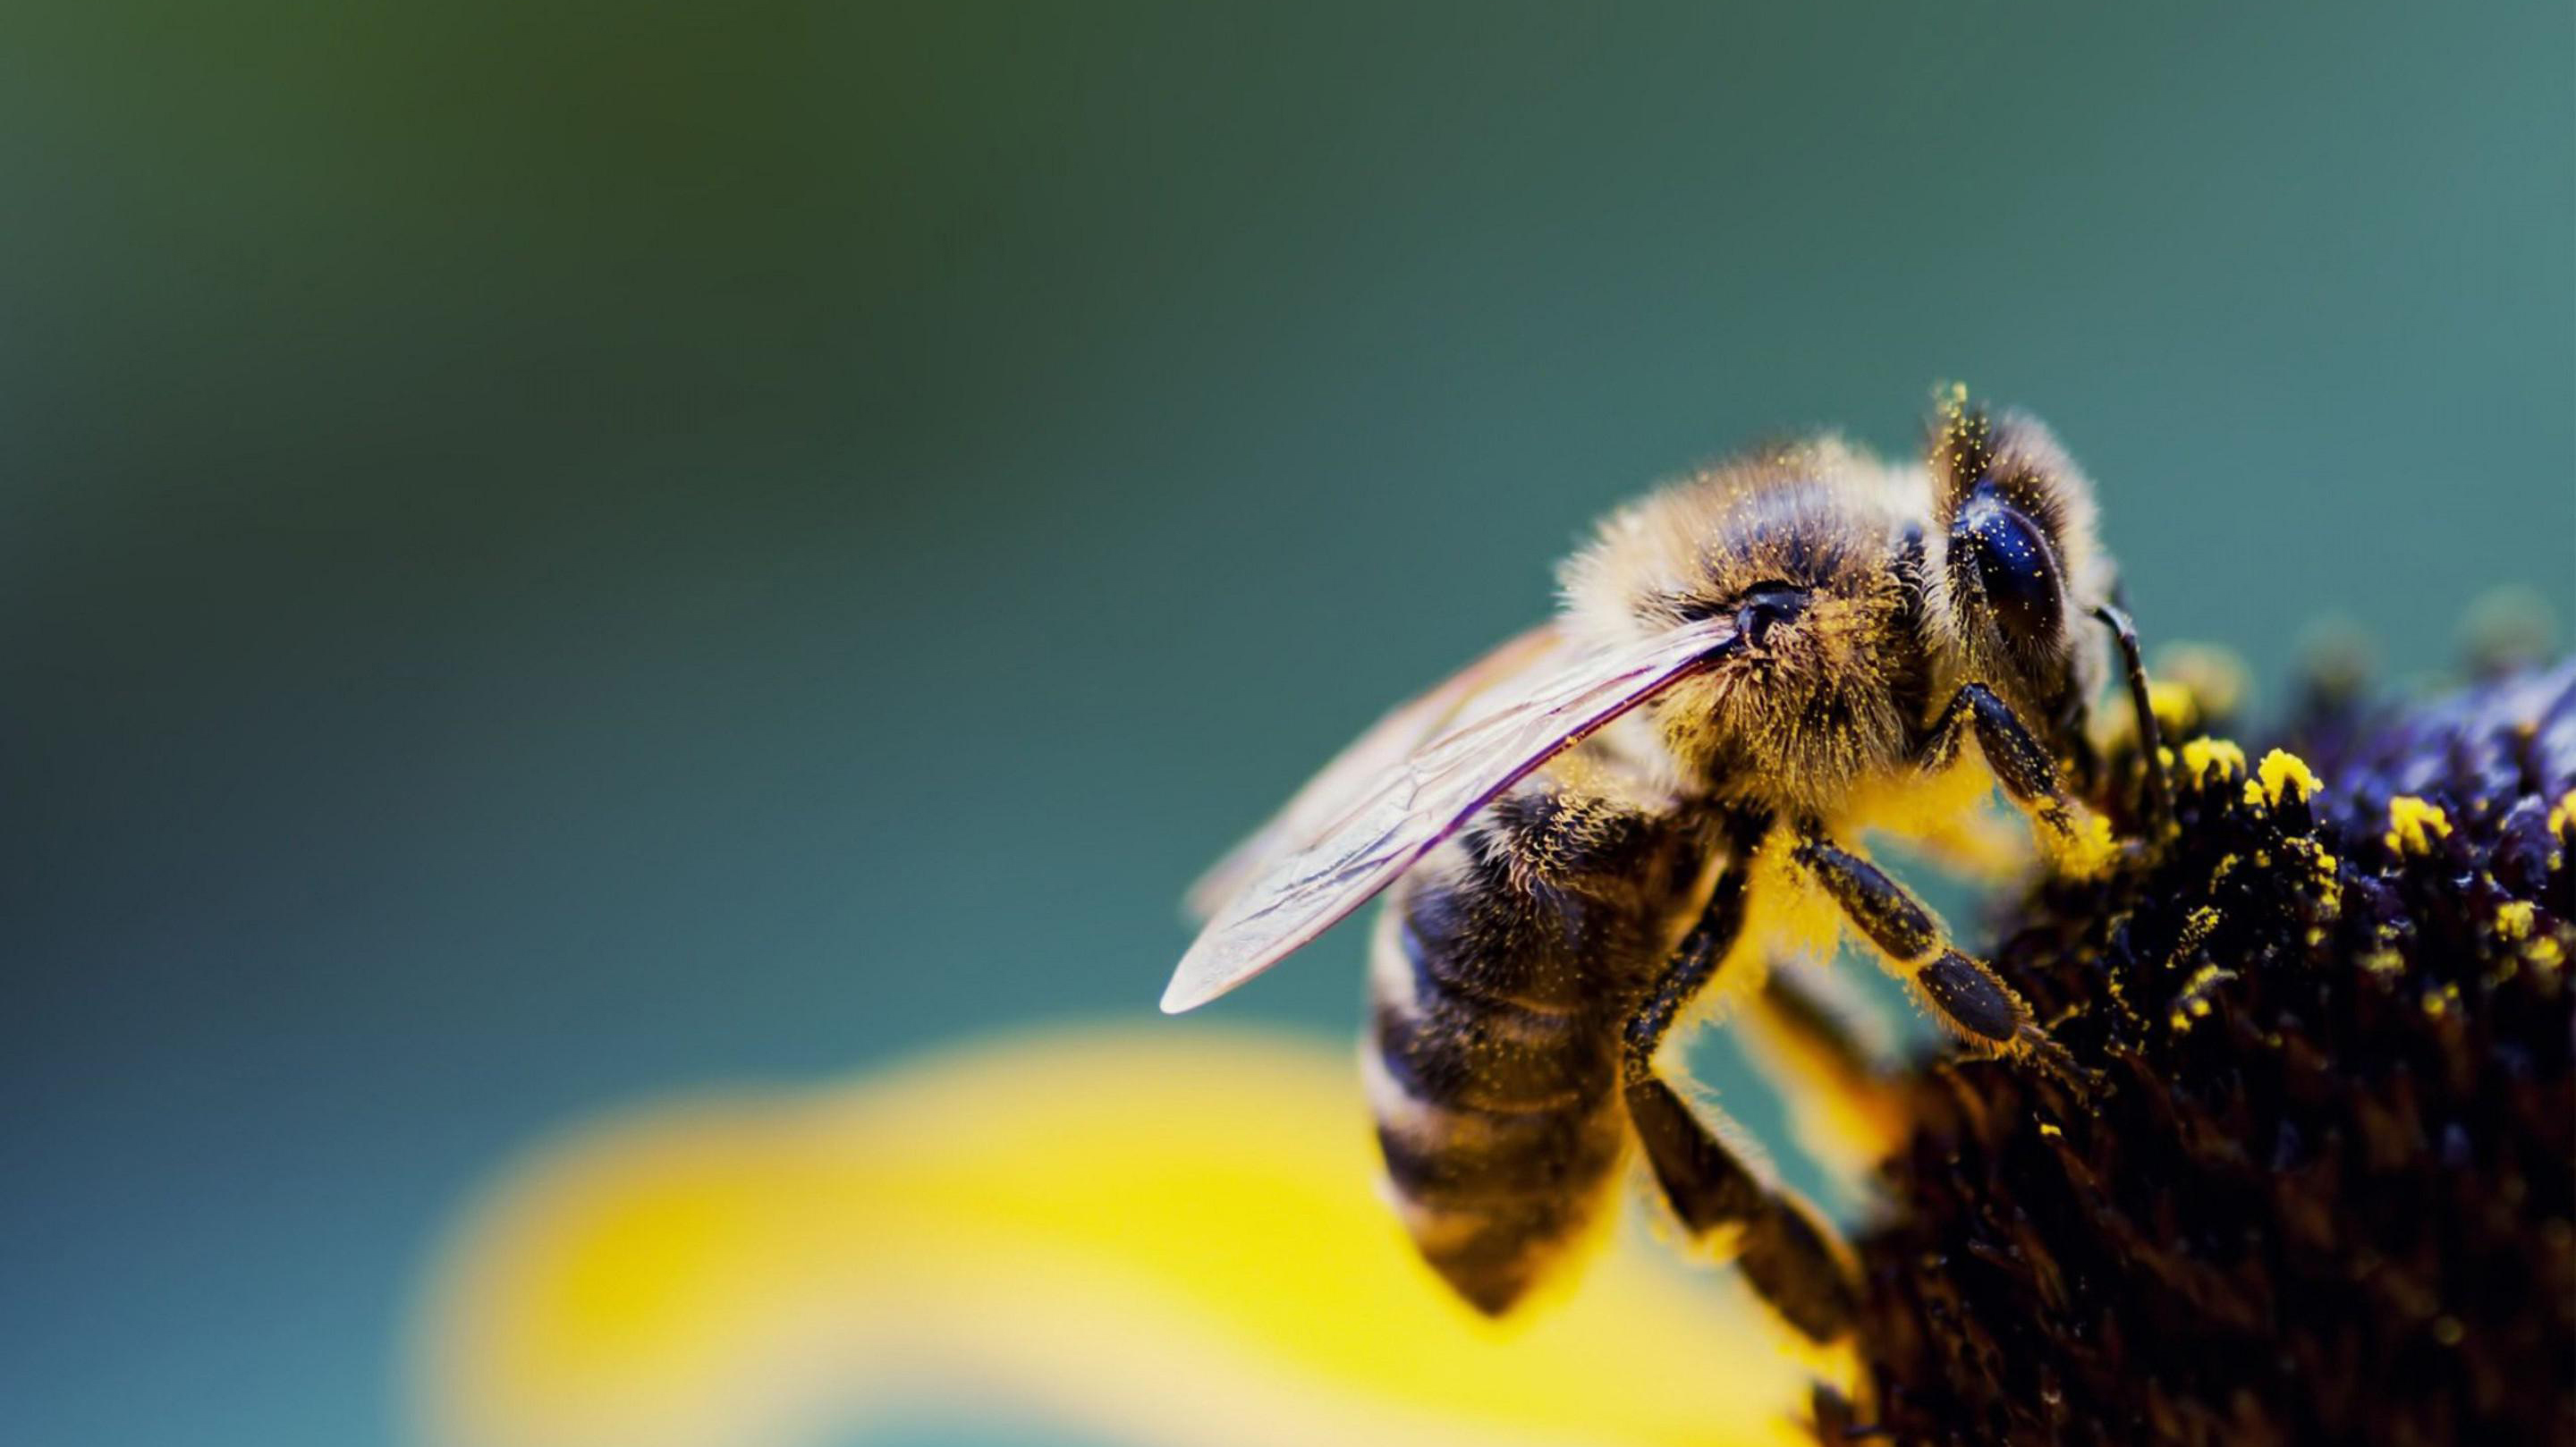 Bees have more brains than we bargained for